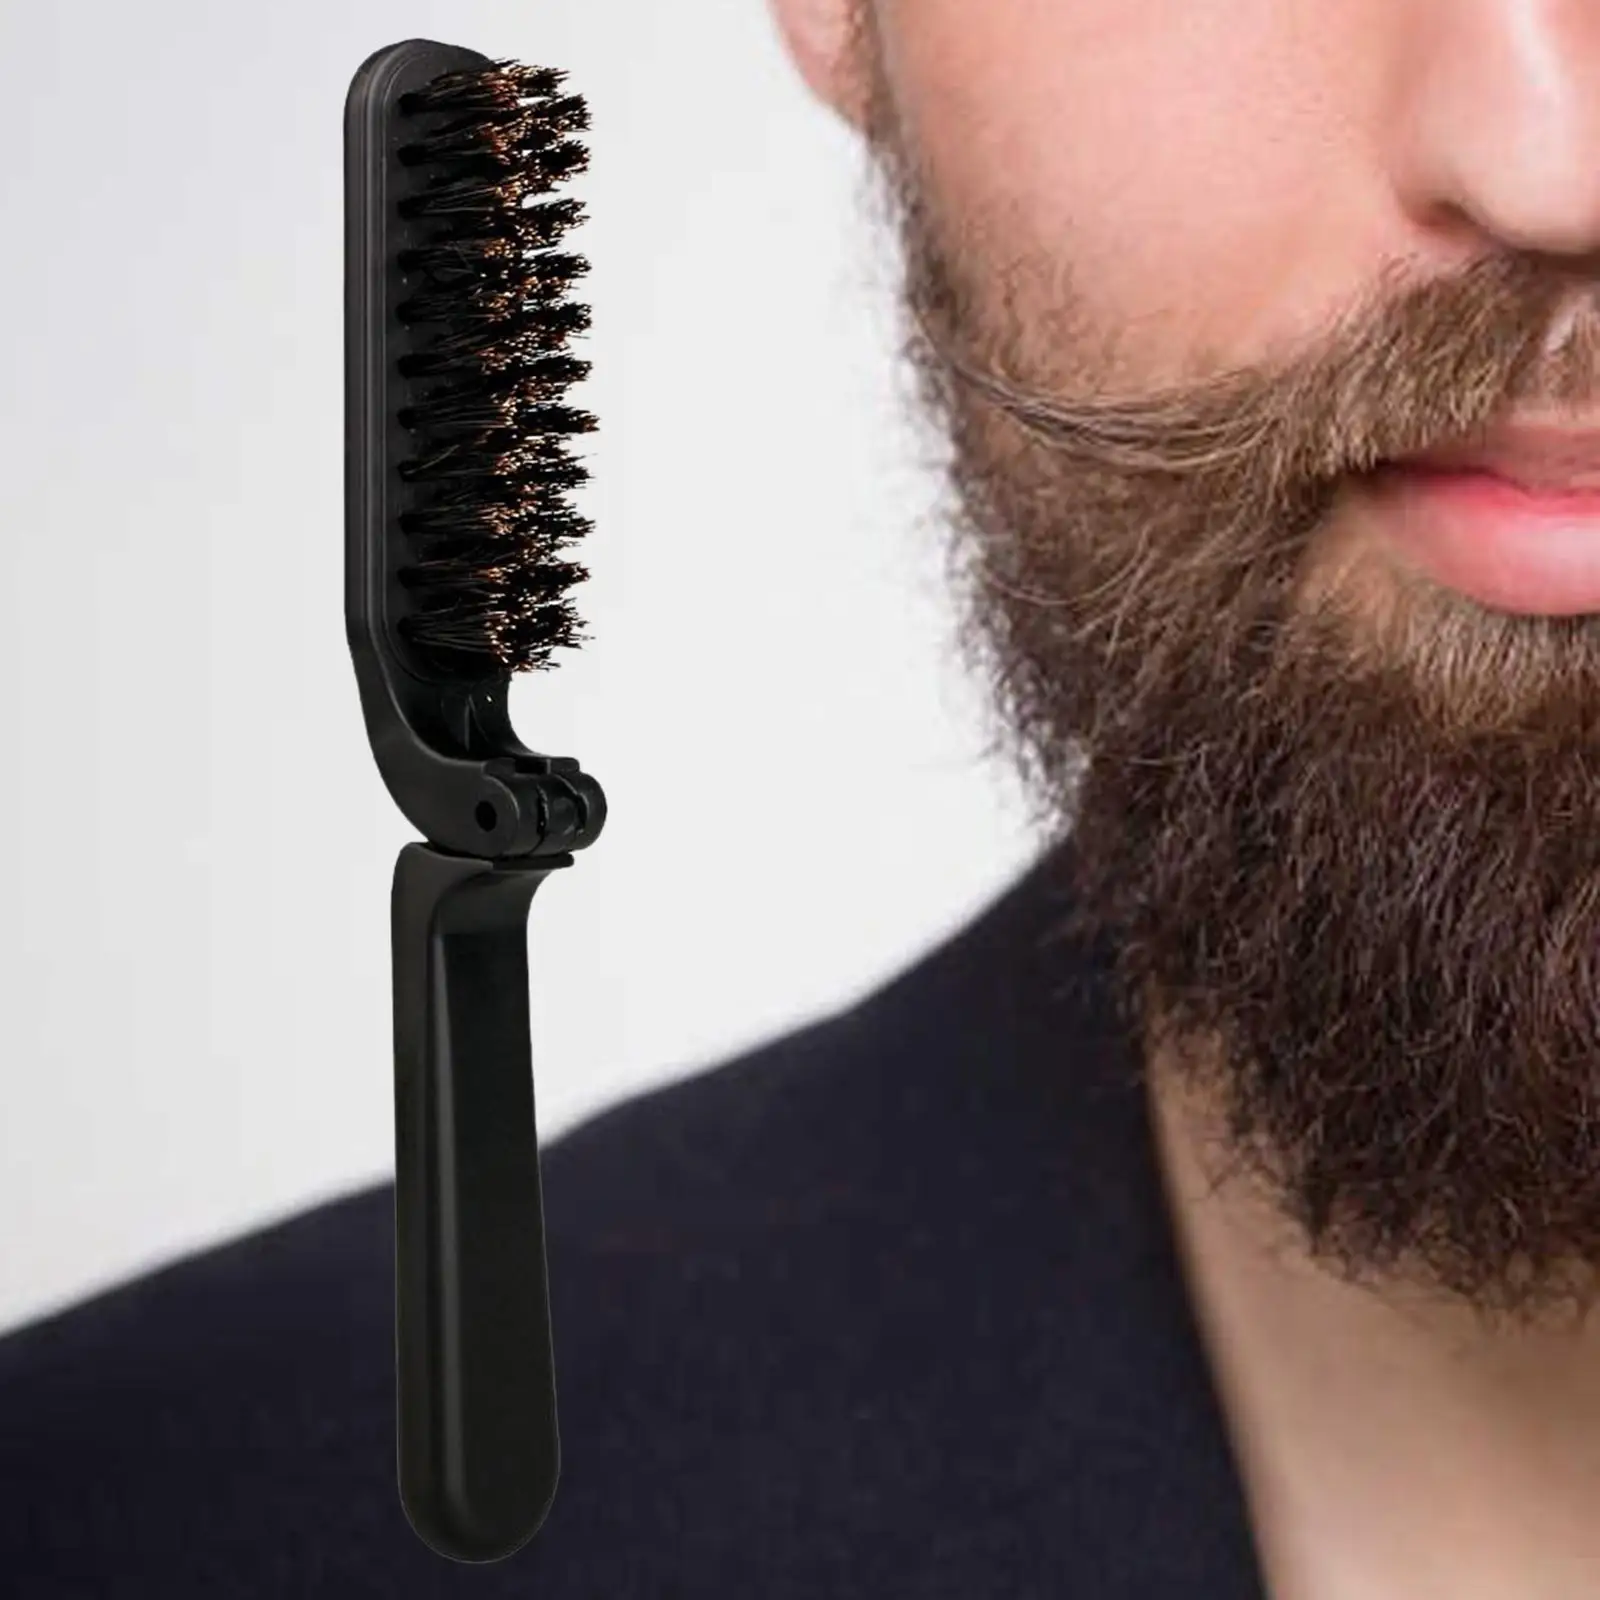 Travel Beard Brushes Foldable ,Works with   and to Soften Beard